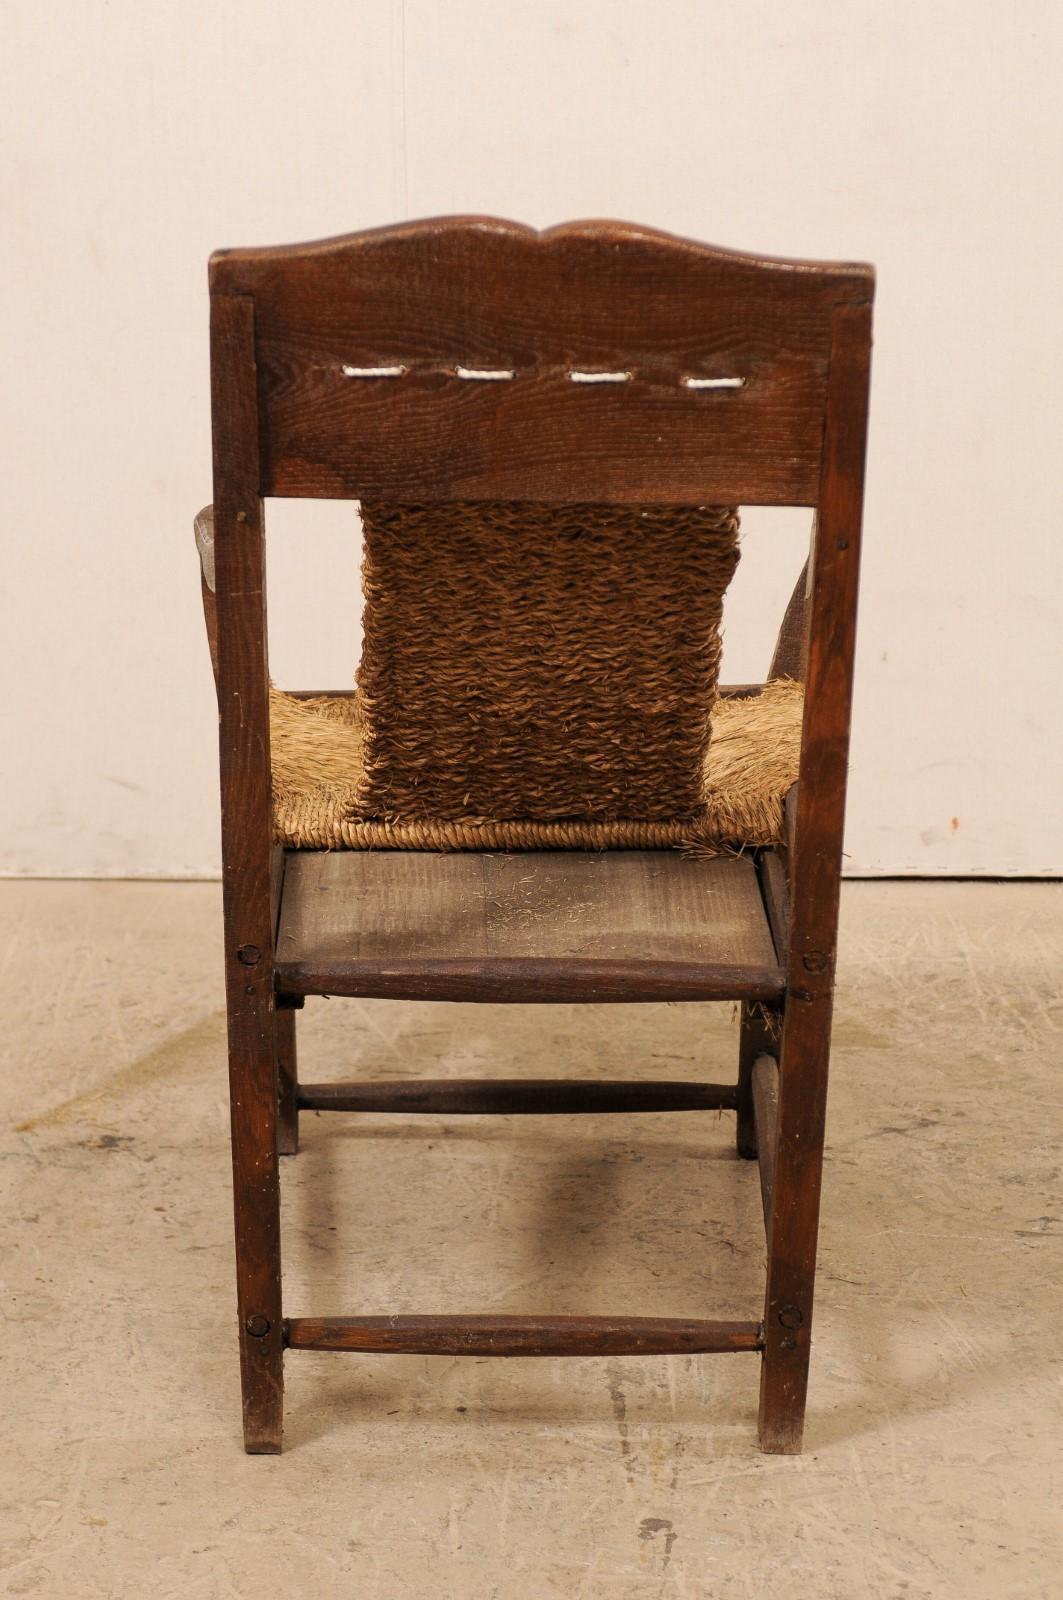 Italian Sling Lounge Chair w/ Rush Seating & Extendable Foot-Rest, Early 20th C. For Sale 4